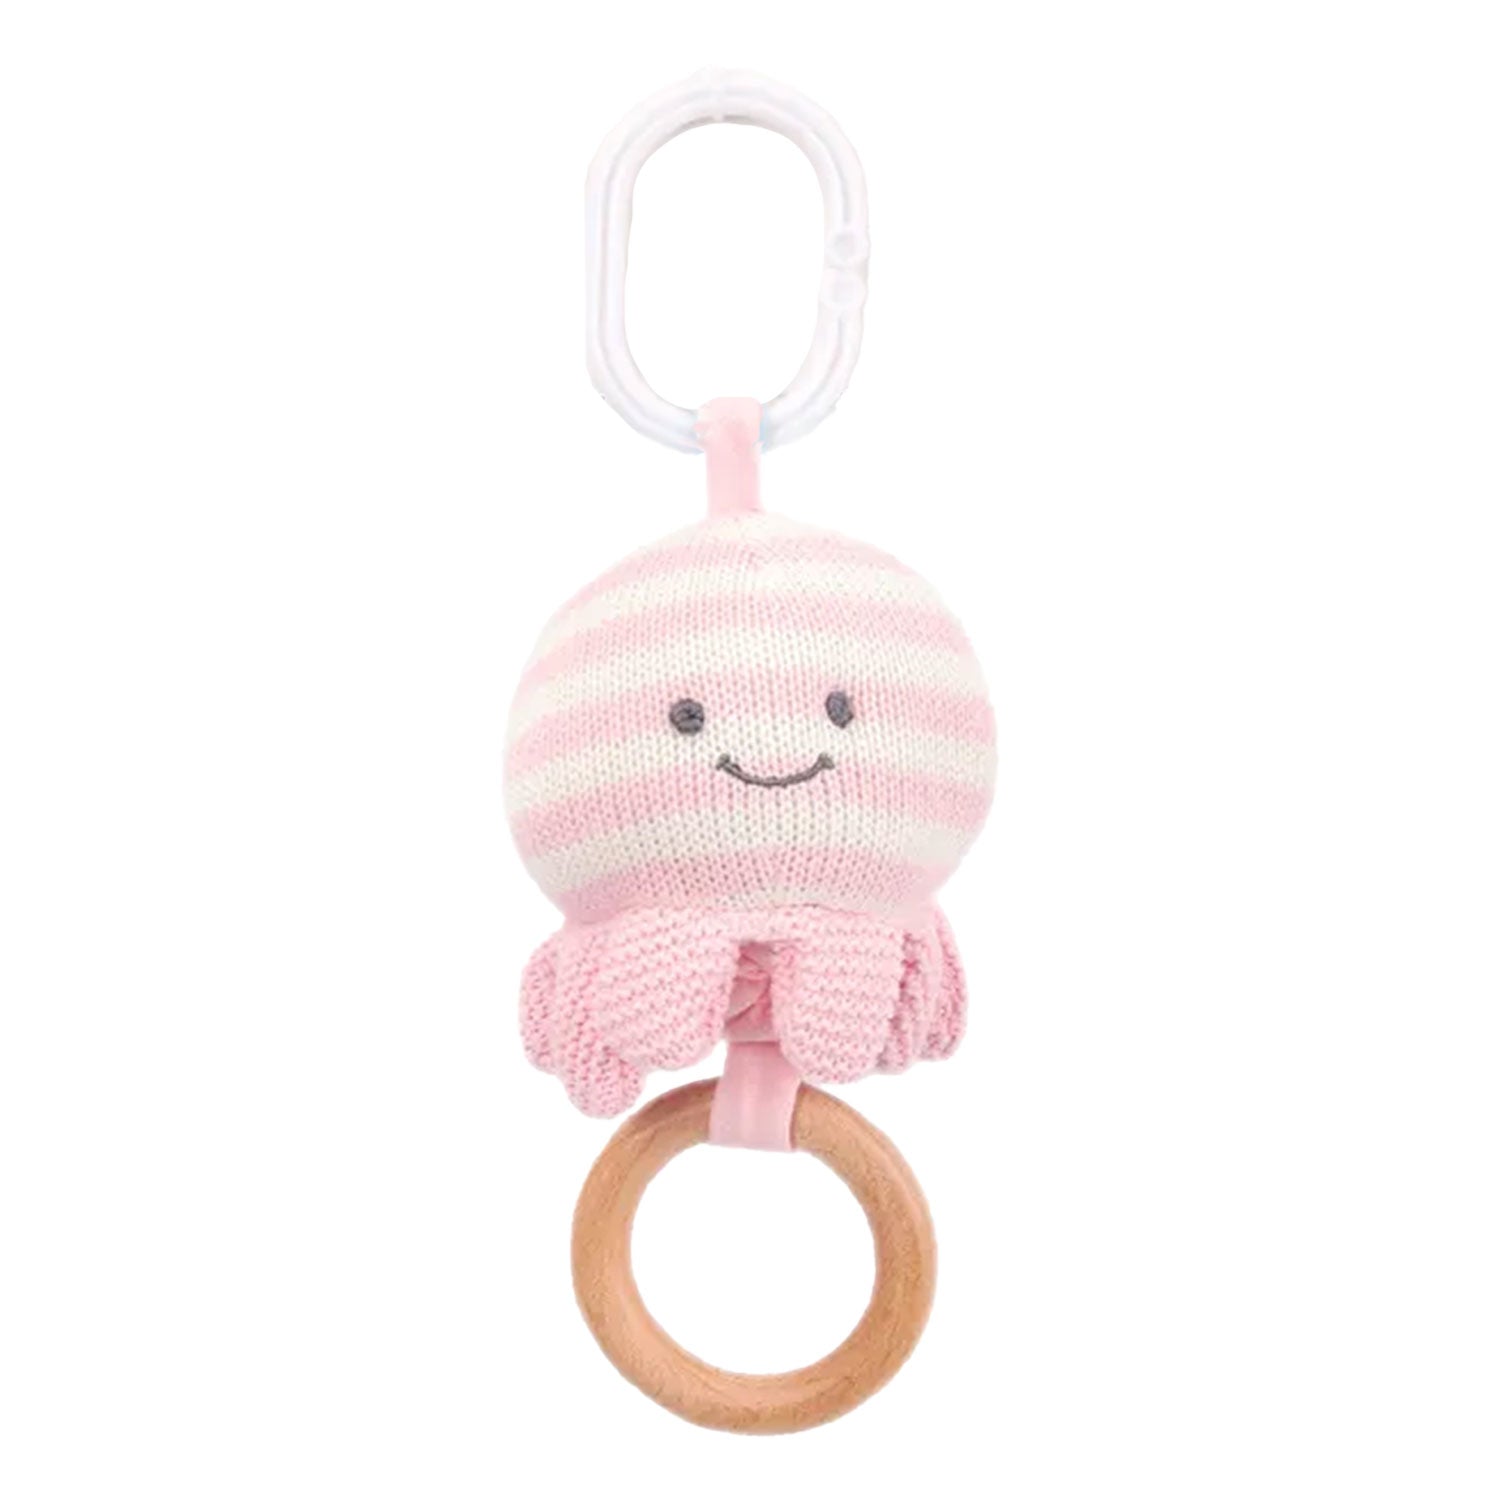 Baby Moo Octopus Wooden Ring Hand Grab Soft Crochet Vibration Pulling Toy - Pink